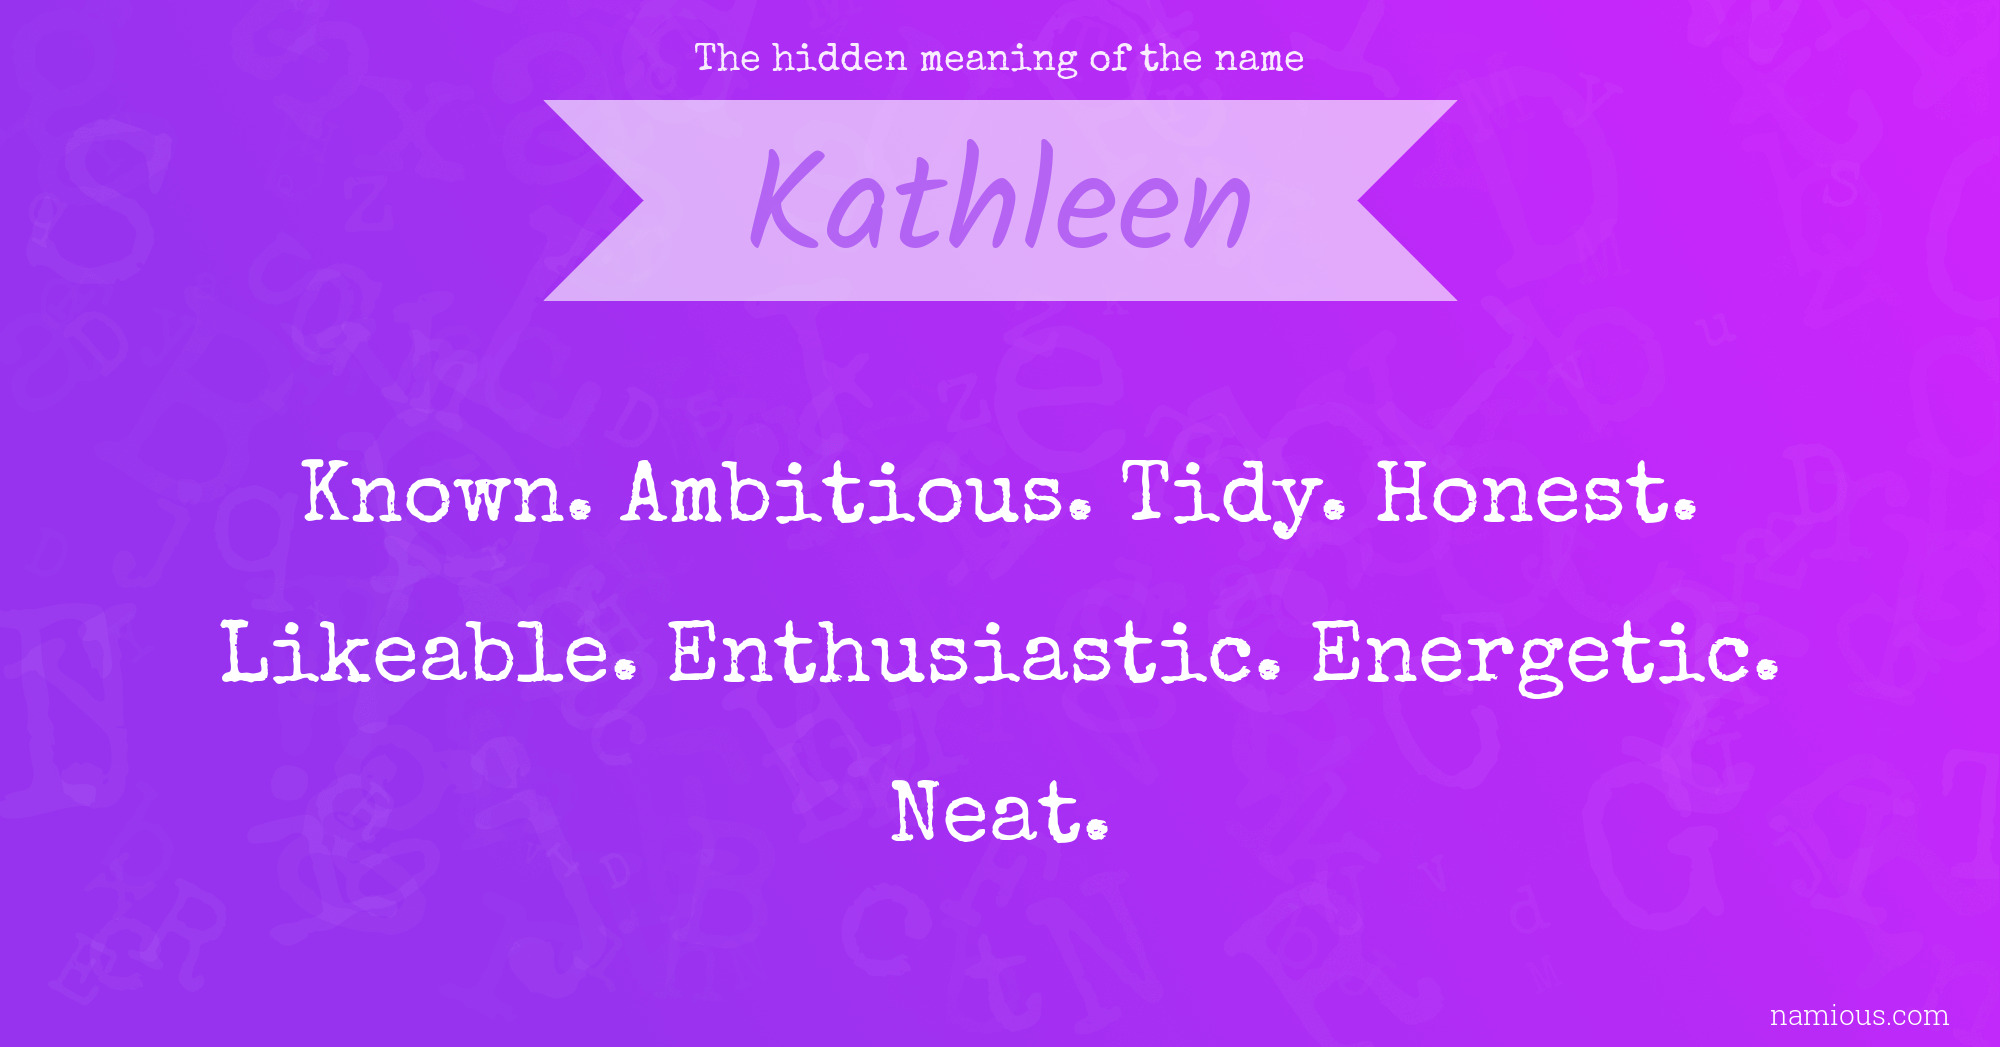 The hidden meaning of the name Kathleen | Namious